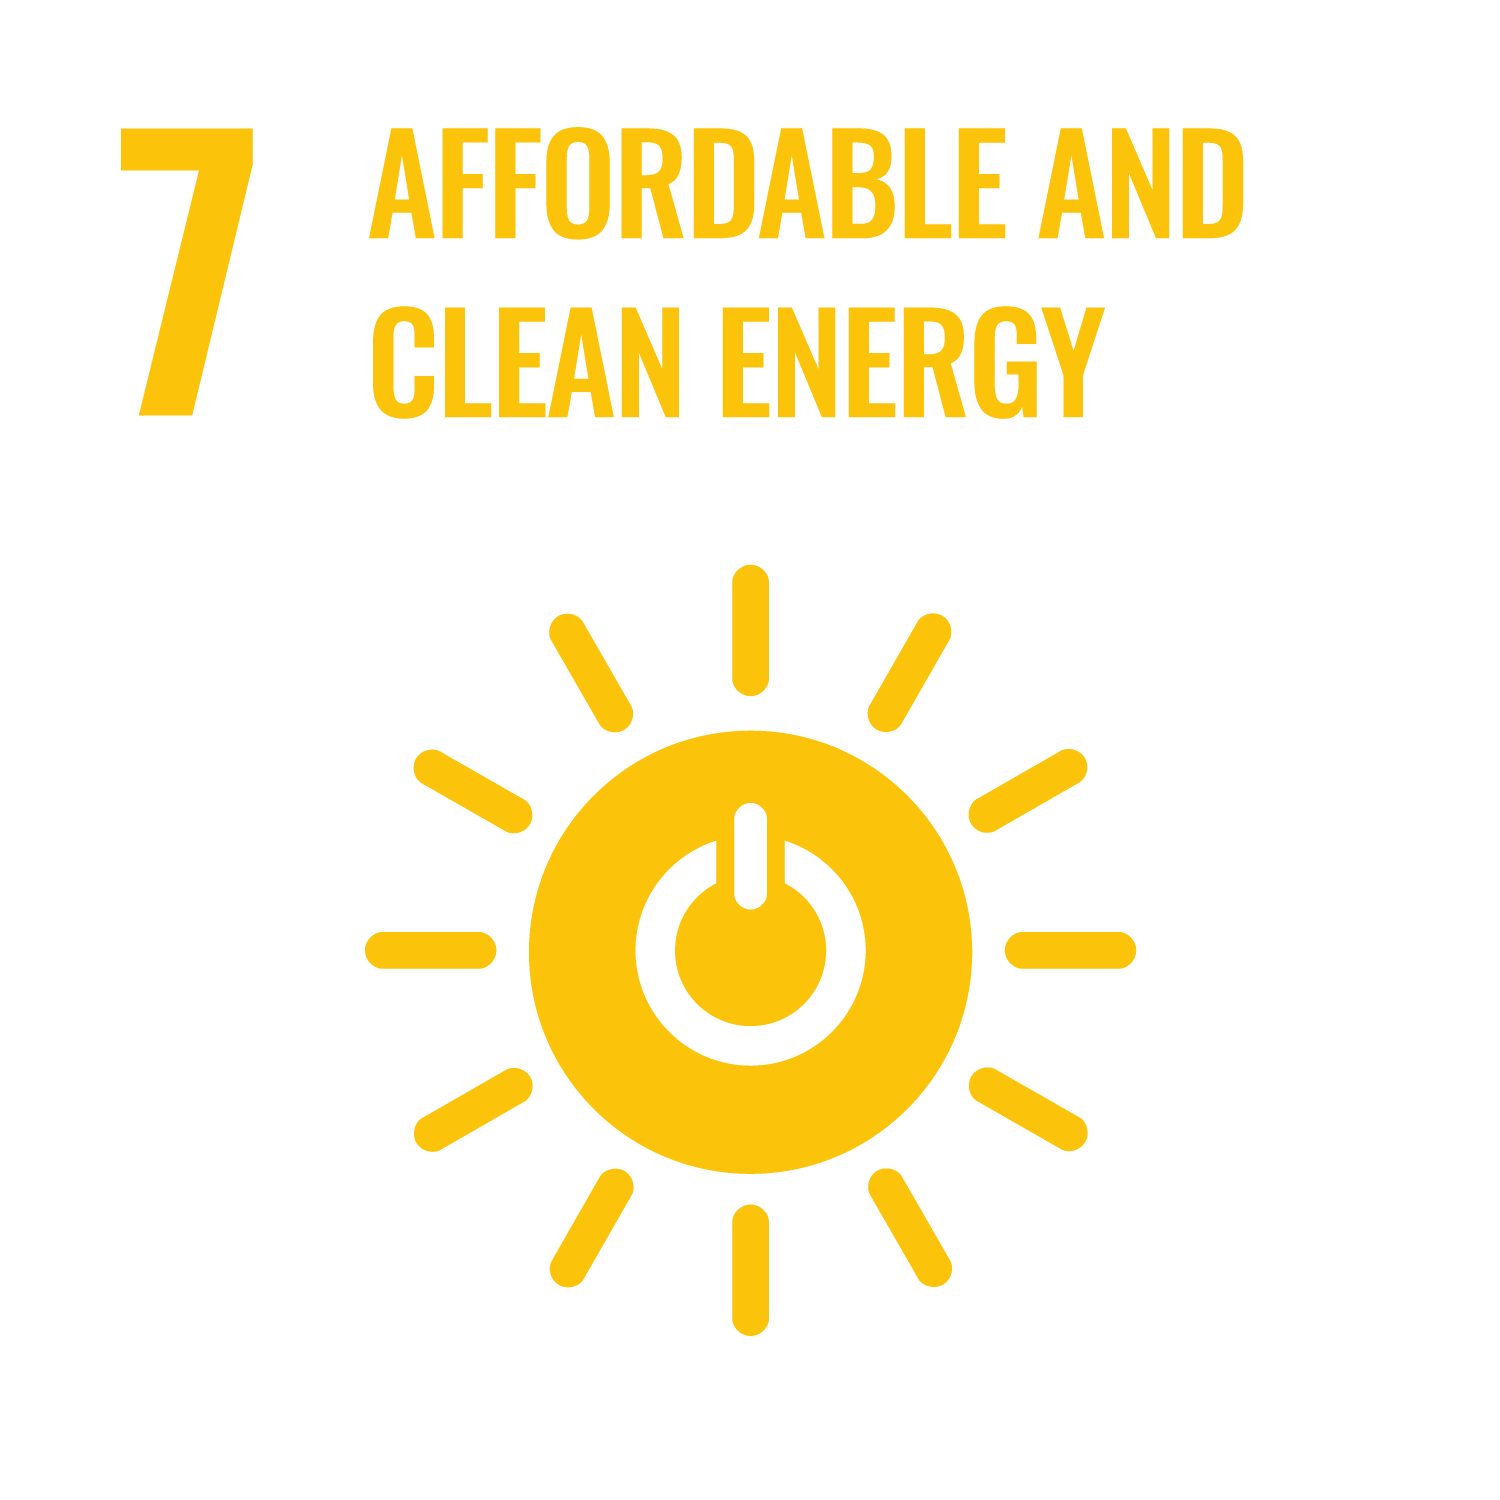 SDG 7: Affordable and clean energy